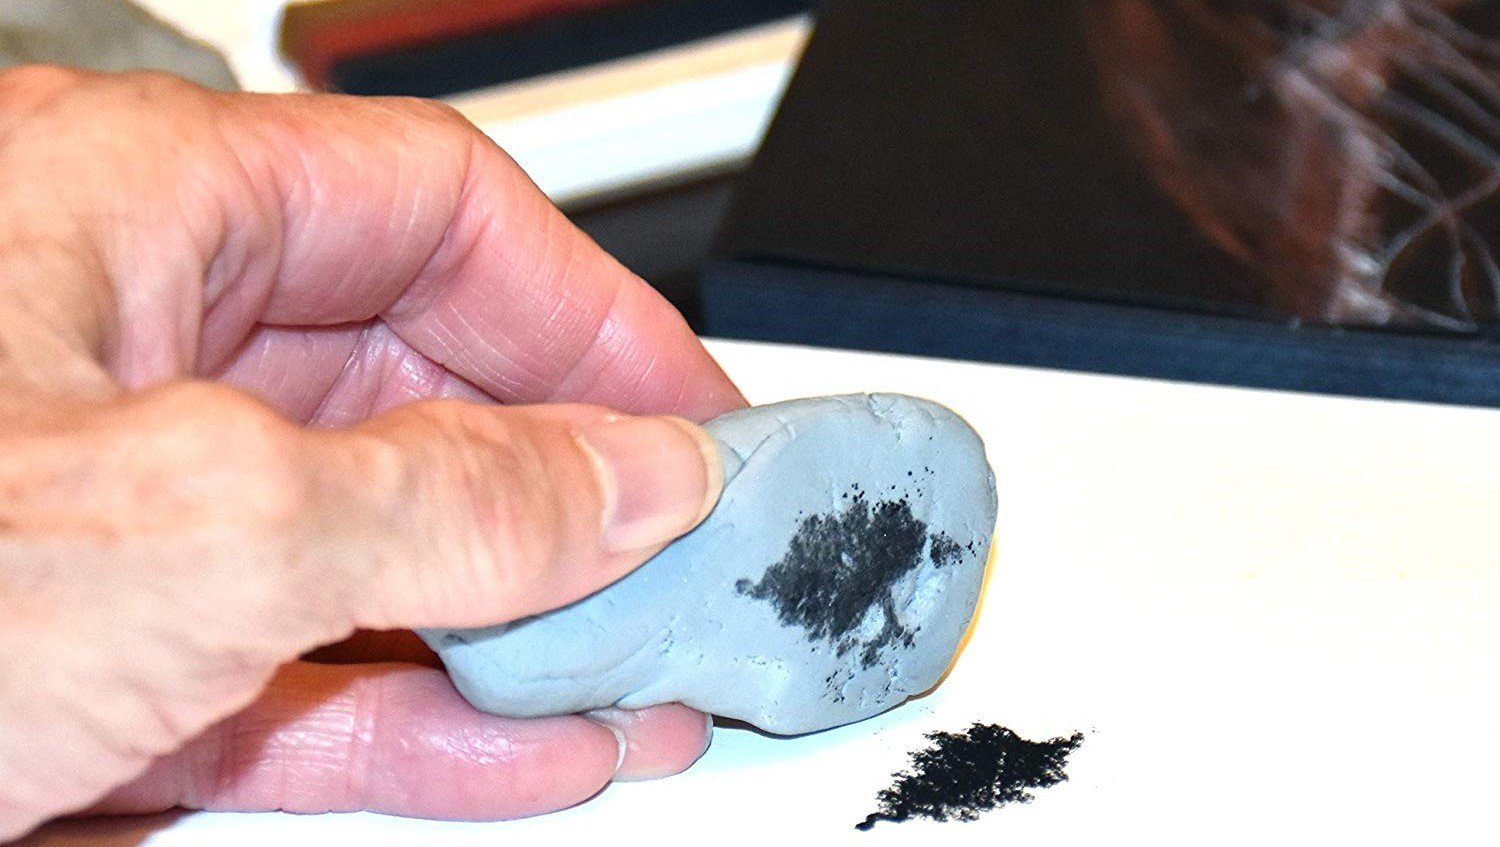 Black patches on kneading eraser